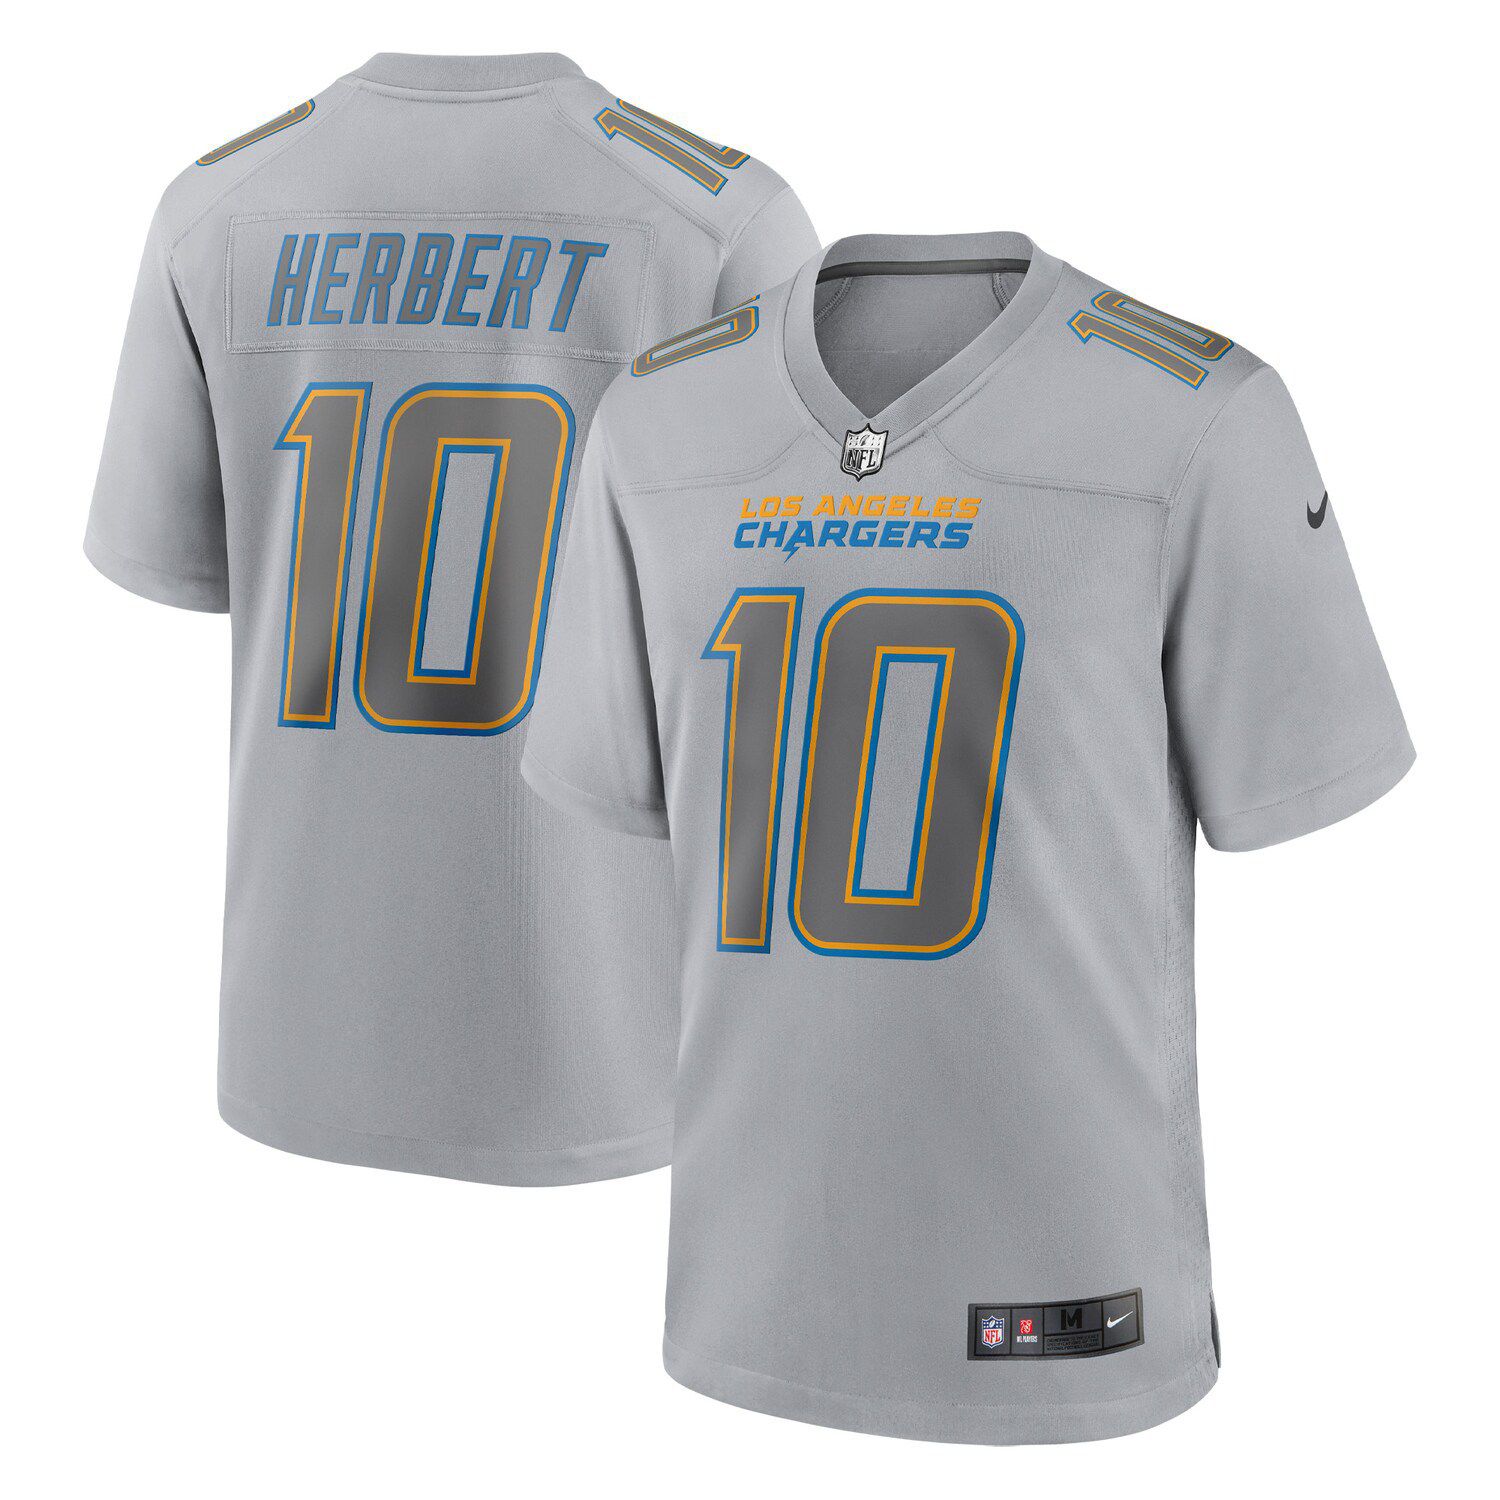 Justin Herbert Los Angeles Chargers Youth Replica Player Jersey